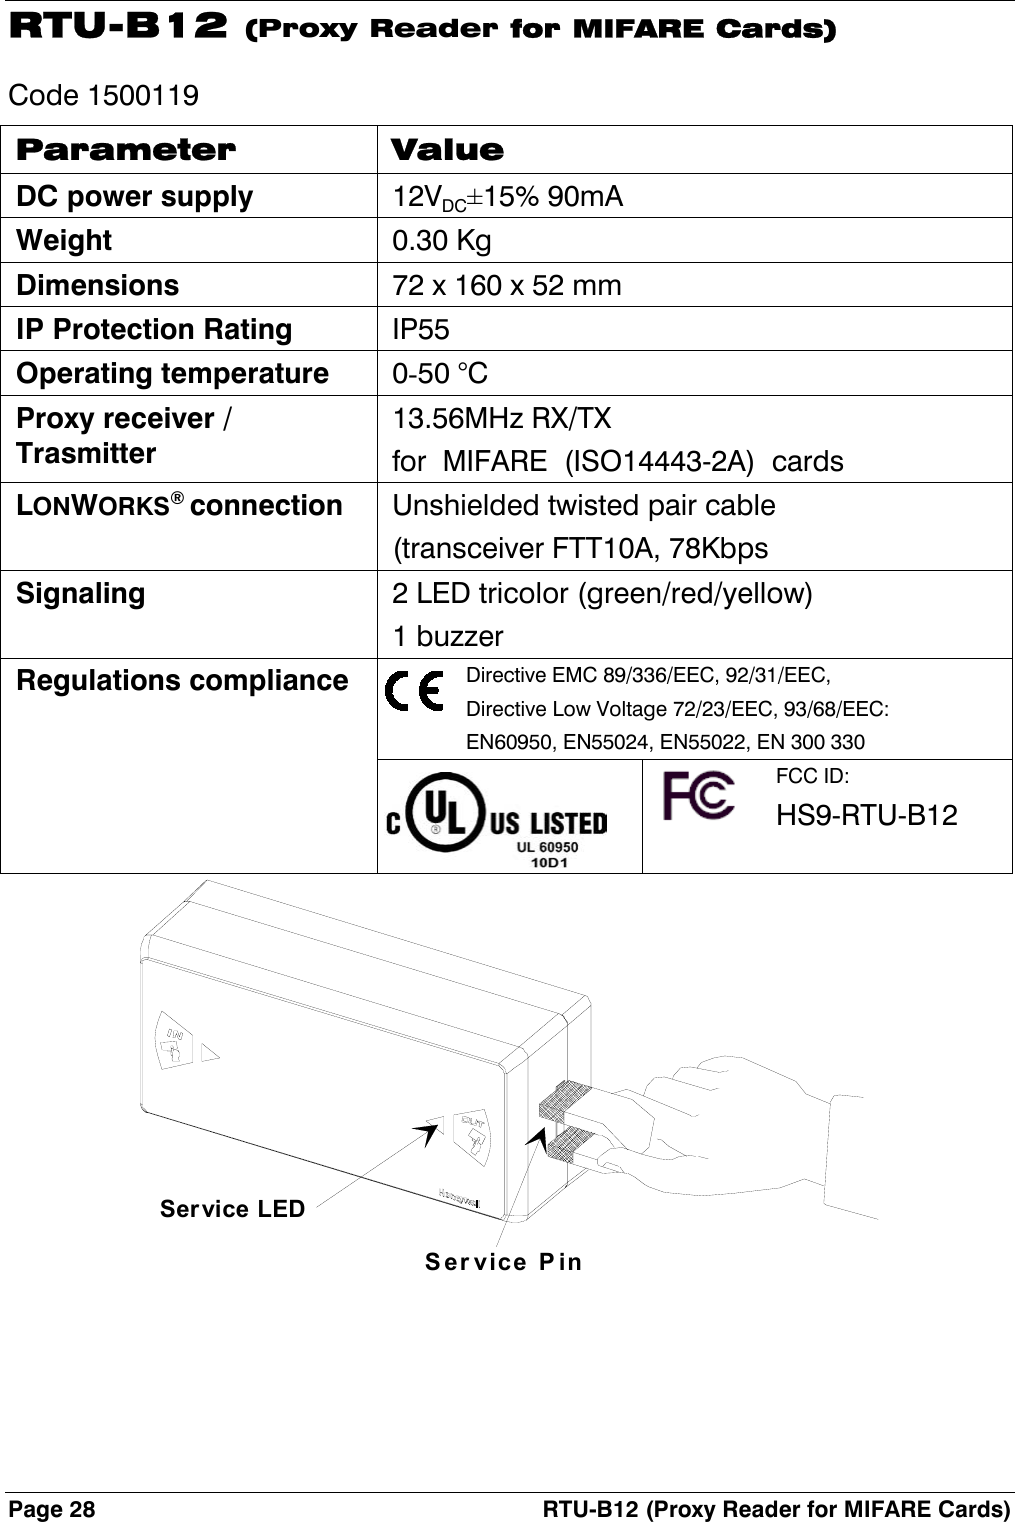 Page 28  RTU-B12 (Proxy Reader for MIFARE Cards) RTU-B12 (Proxy Reader for MIFARE Cards) Code 1500119 Parameter Value DC power supply 12VDC±15% 90mA Weight 0.30 Kg Dimensions  72 x 160 x 52 mm IP Protection Rating IP55 Operating temperature 0-50 °C Proxy receiver / Trasmitter 13.56MHz RX/TX for  MIFARE  (ISO14443-2A)  cards LONWORKS® connection  Unshielded twisted pair cable (transceiver FTT10A, 78Kbps Signaling  2 LED tricolor (green/red/yellow) 1 buzzer Regulations compliance  Directive EMC 89/336/EEC, 92/31/EEC, Directive Low Voltage 72/23/EEC, 93/68/EEC: EN60950, EN55024, EN55022, EN 300 330    FCC ID: HS9-RTU-B12 Service PinSer vice LED 